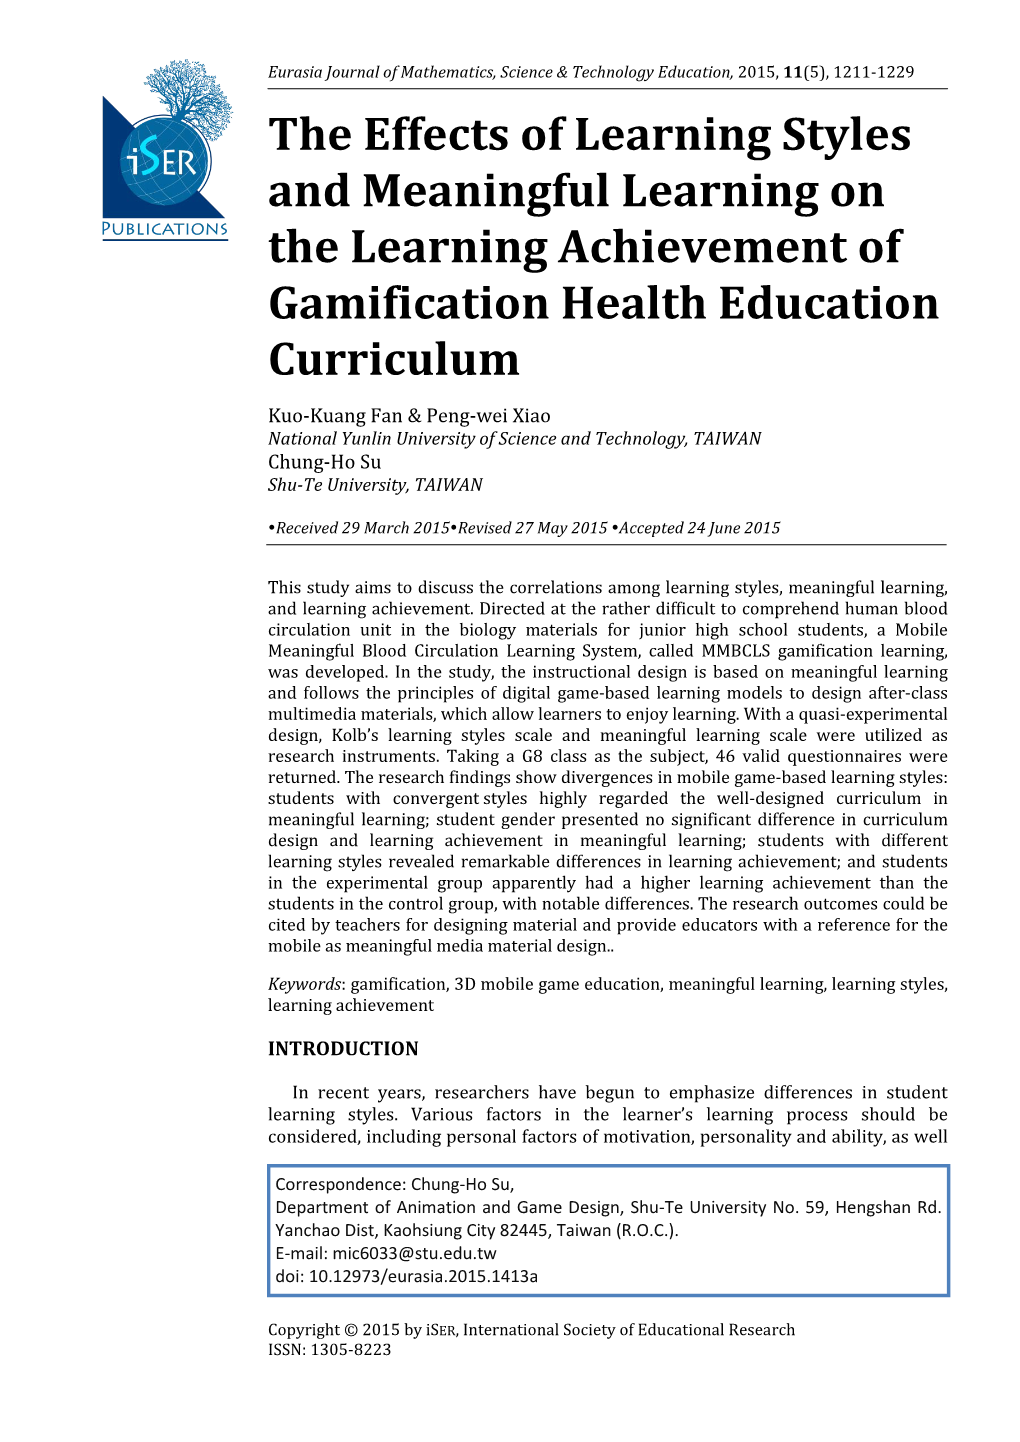 The Effects of Learning Styles and Meaningful Learning on the Learning Achievement of Gamification Health Education Curriculum